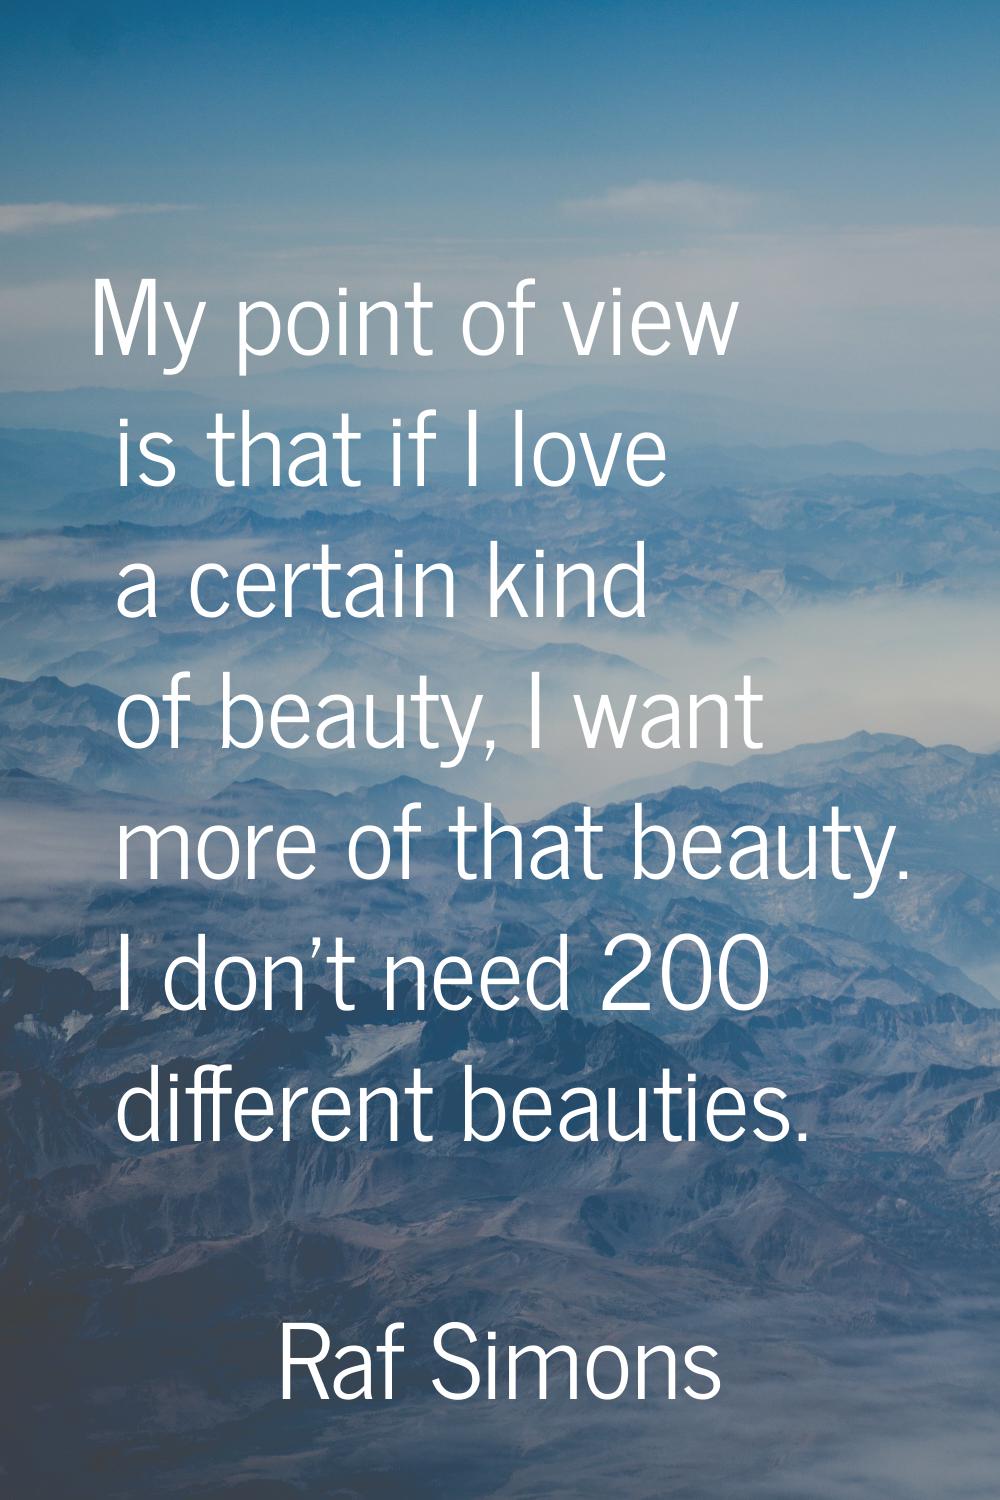 My point of view is that if I love a certain kind of beauty, I want more of that beauty. I don't ne